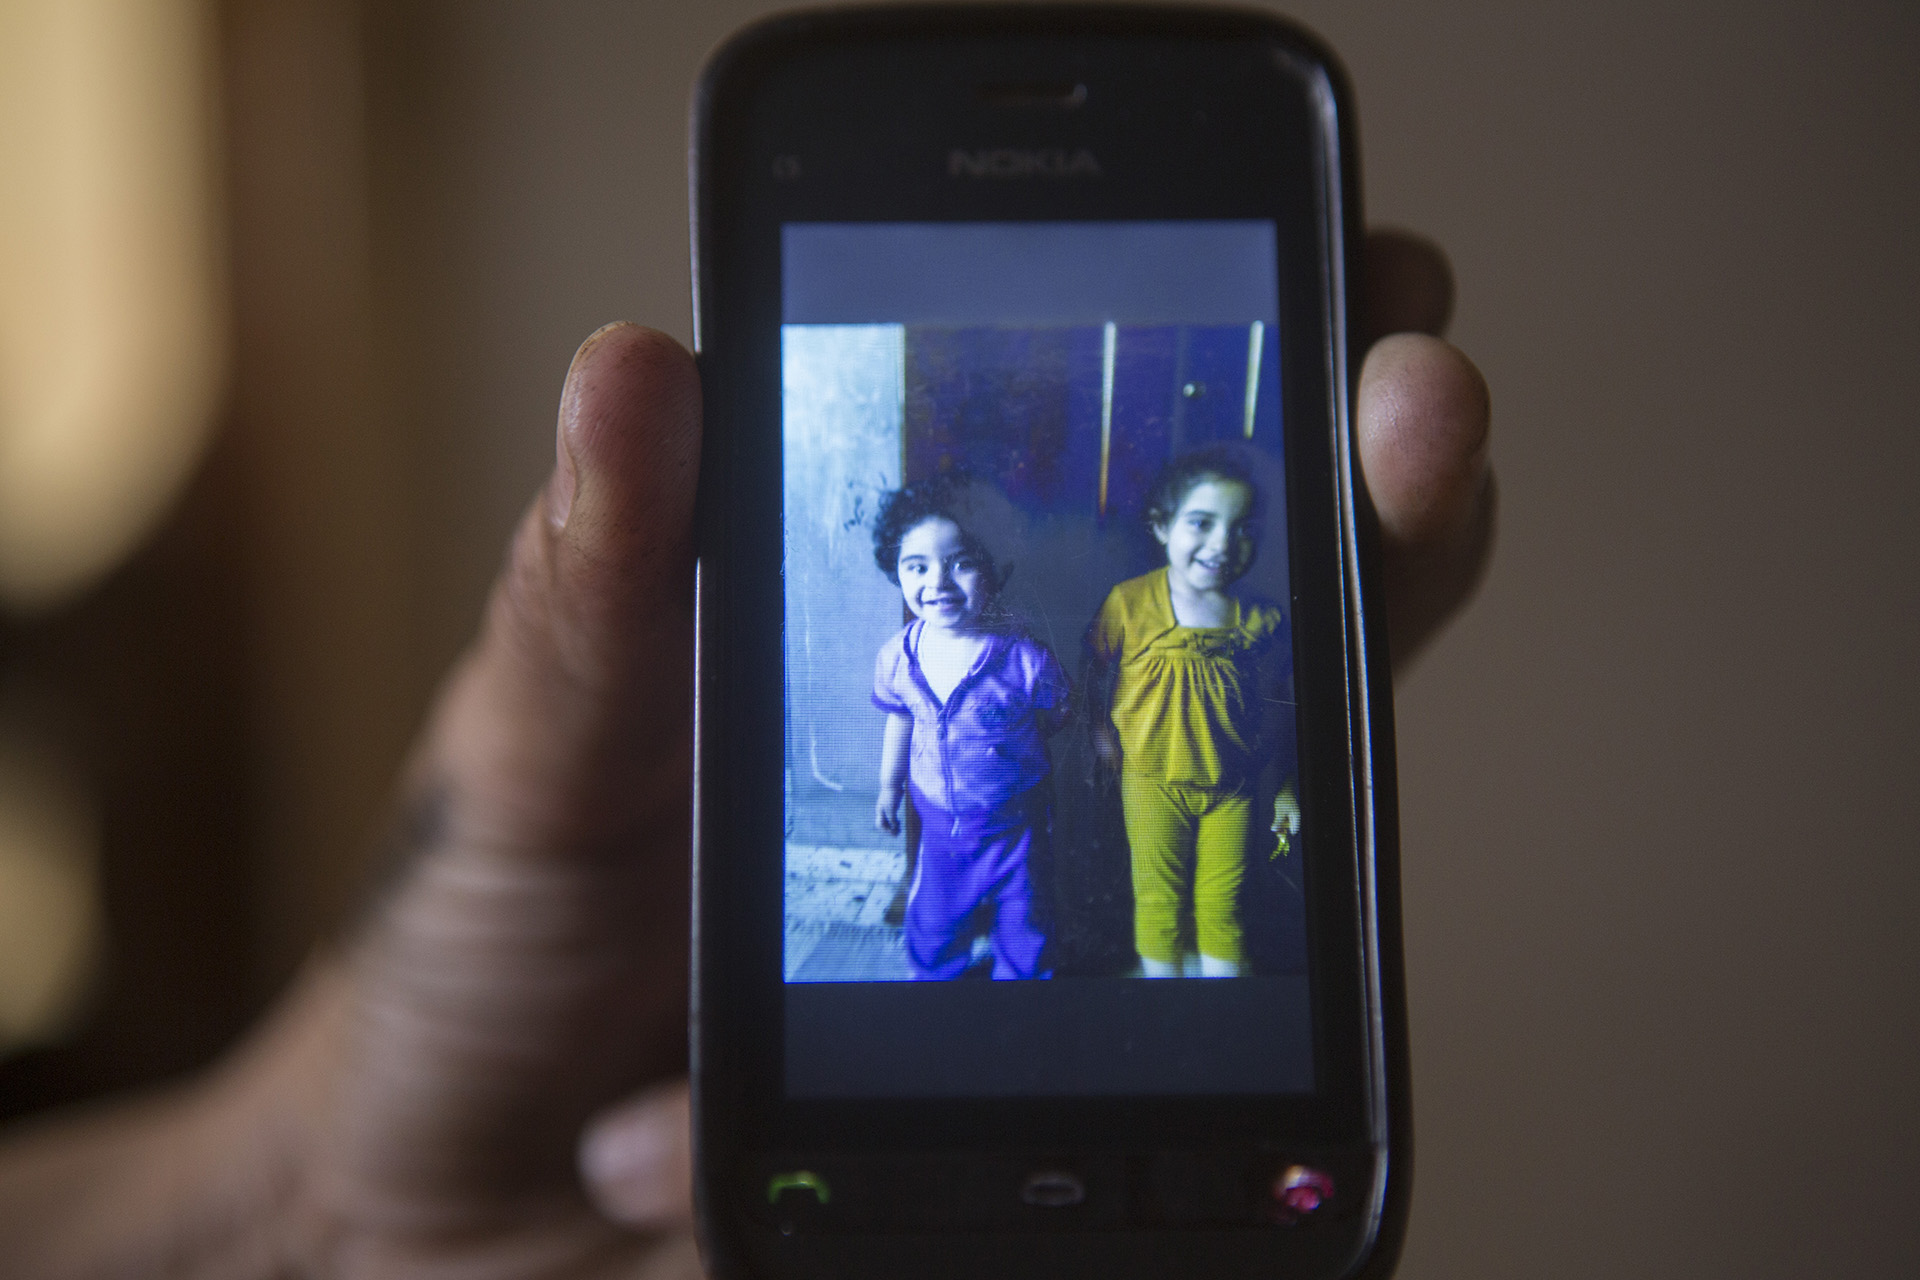 Photos of Hala and Jana, Mohammed's nieces, killed together with their parents in the Israeli airstrike on the Maadi house.
